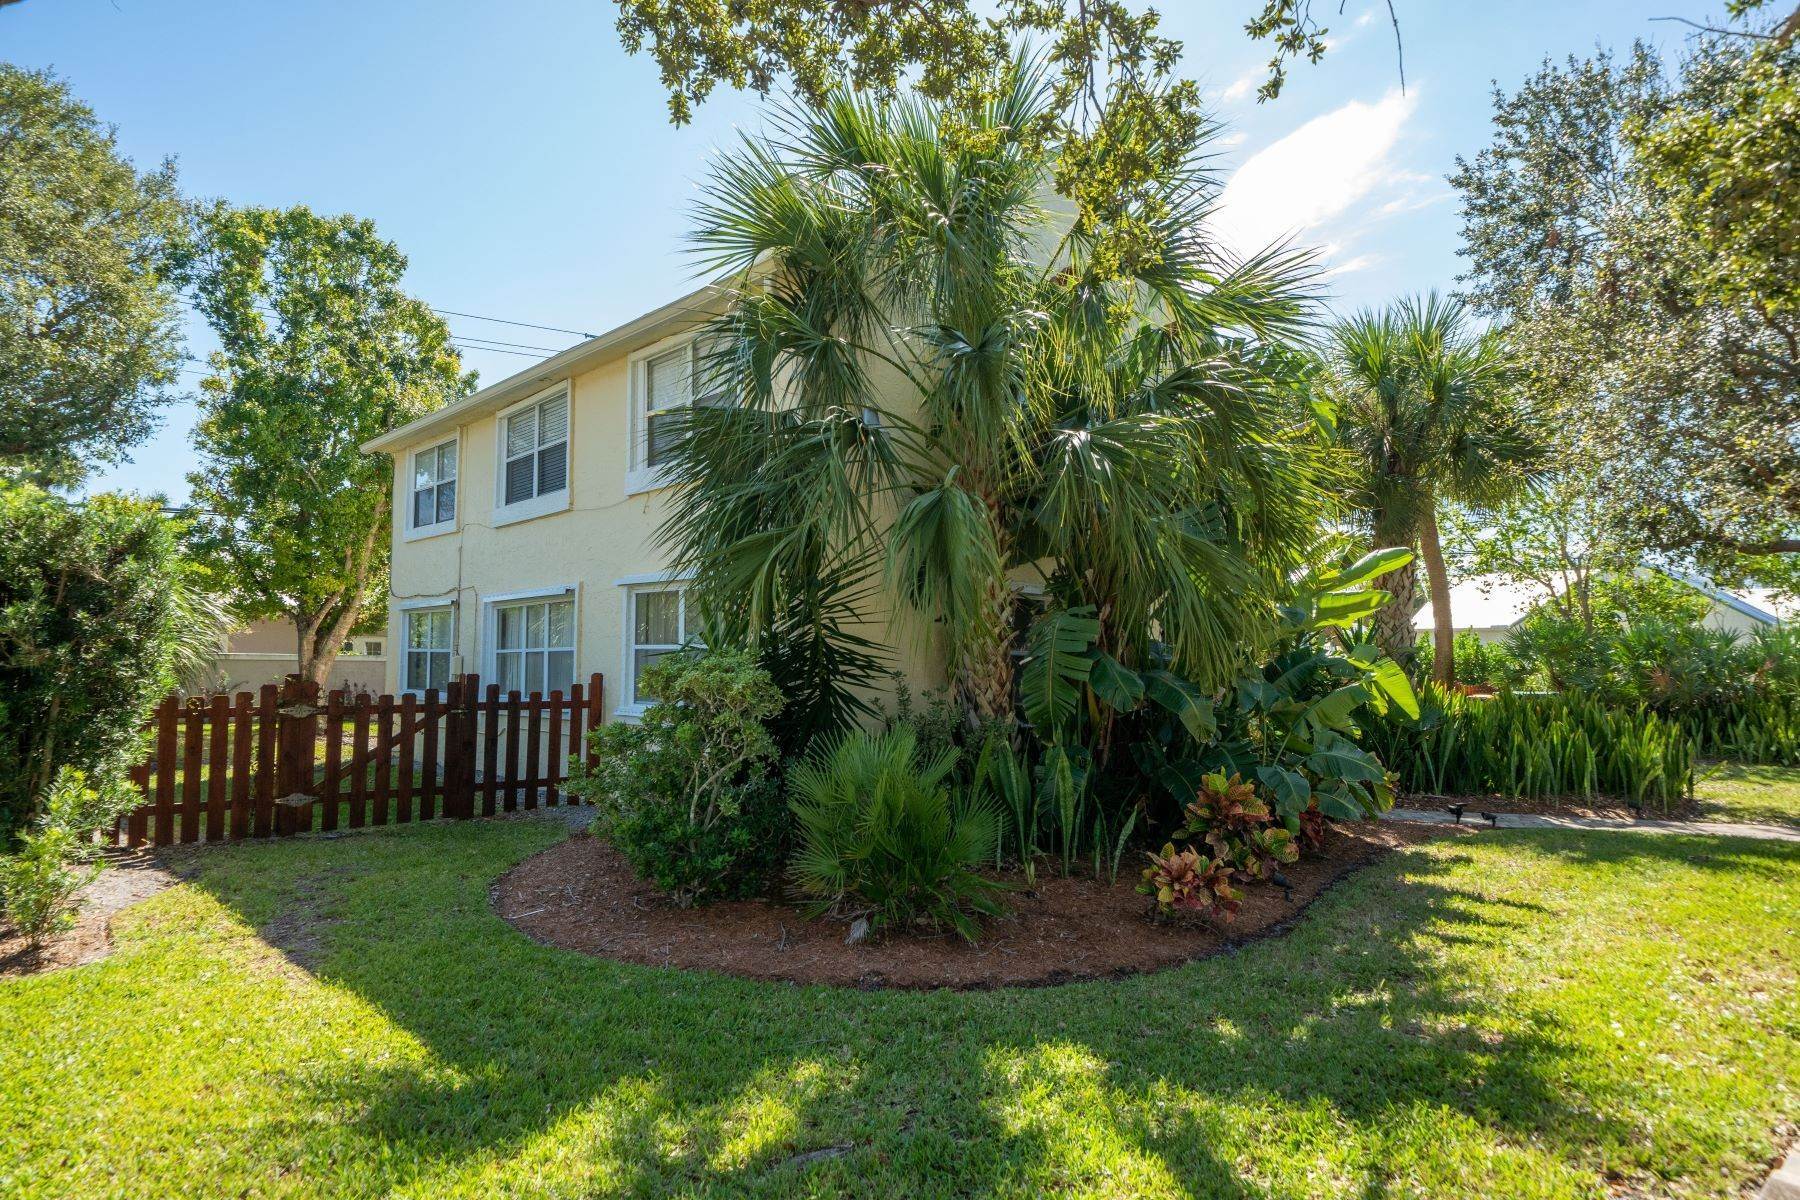 Multi-Family Homes for Sale at 435 3rd Avenue, Indialantic, FL 435 3rd Avenue Indialantic, Florida 32903 United States